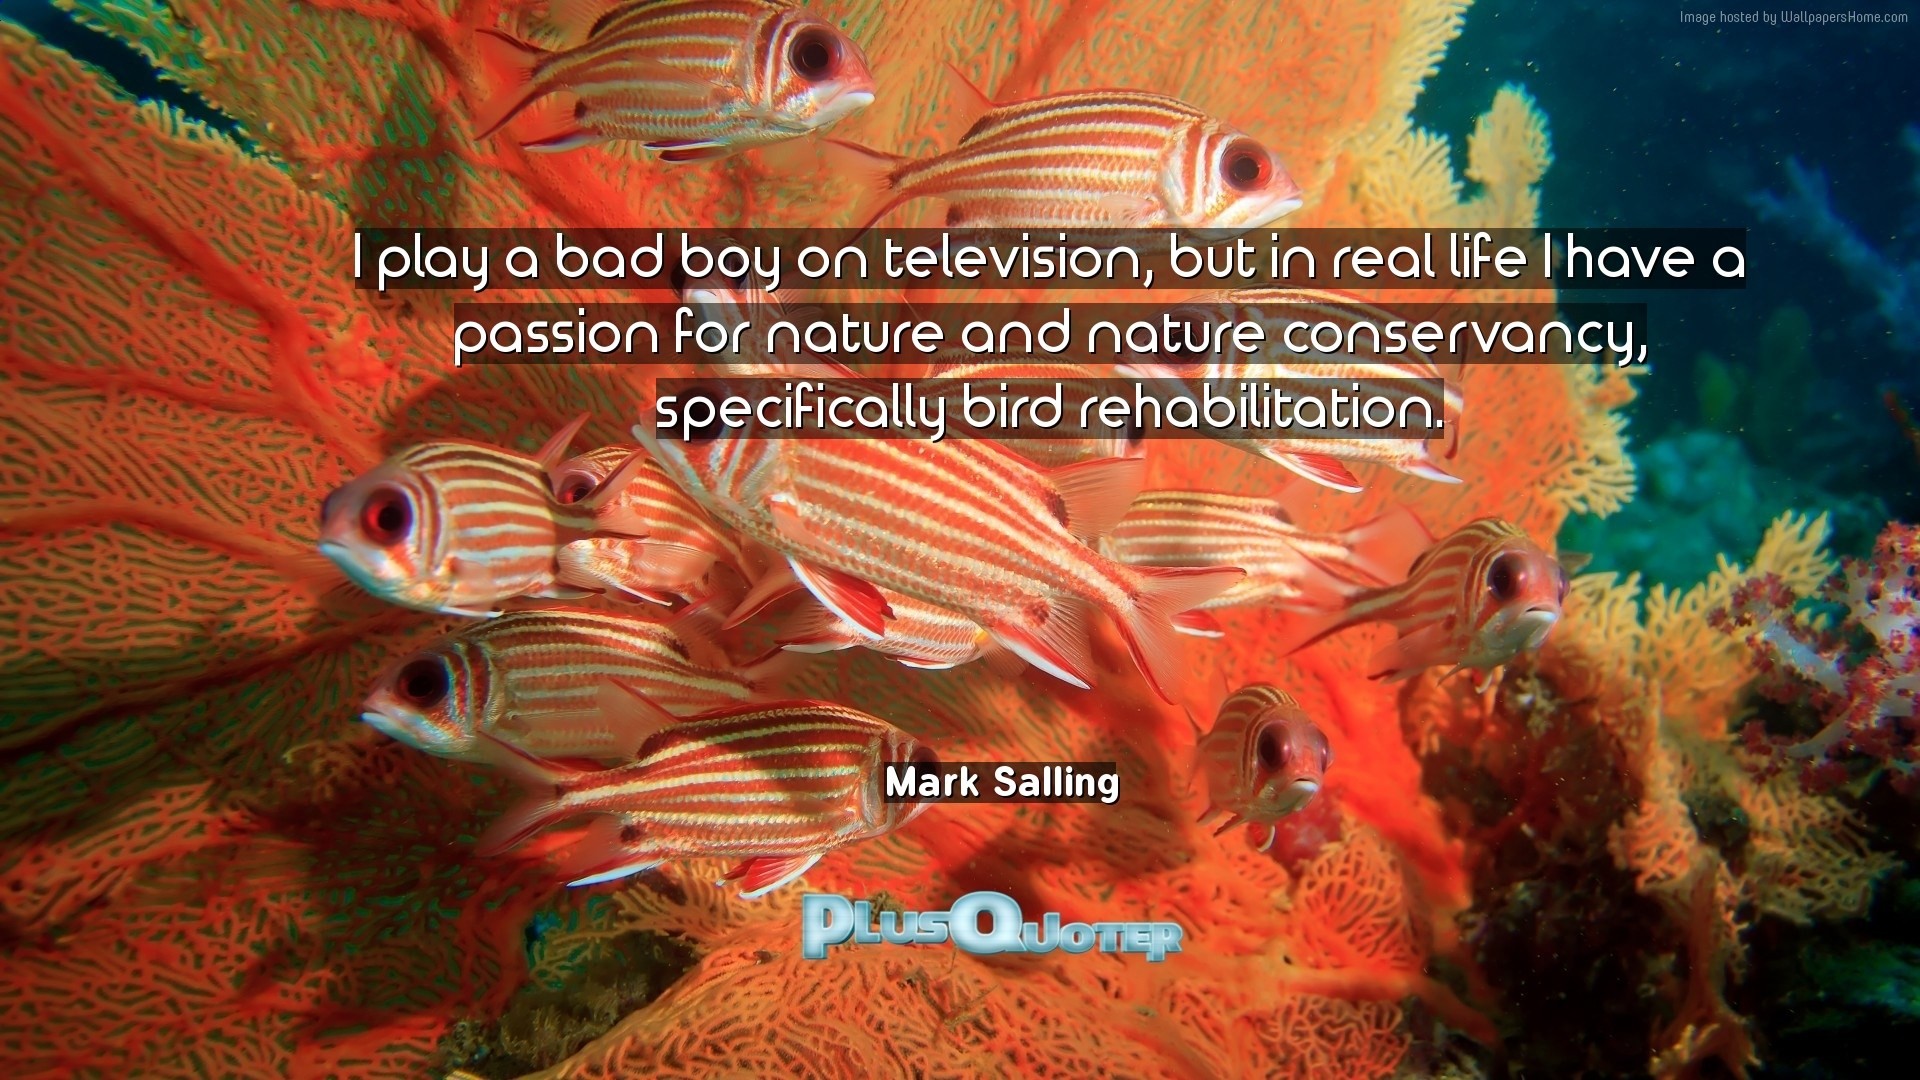 1920x1080 Download Wallpaper with inspirational Quotes- "I play a bad boy on  television, but